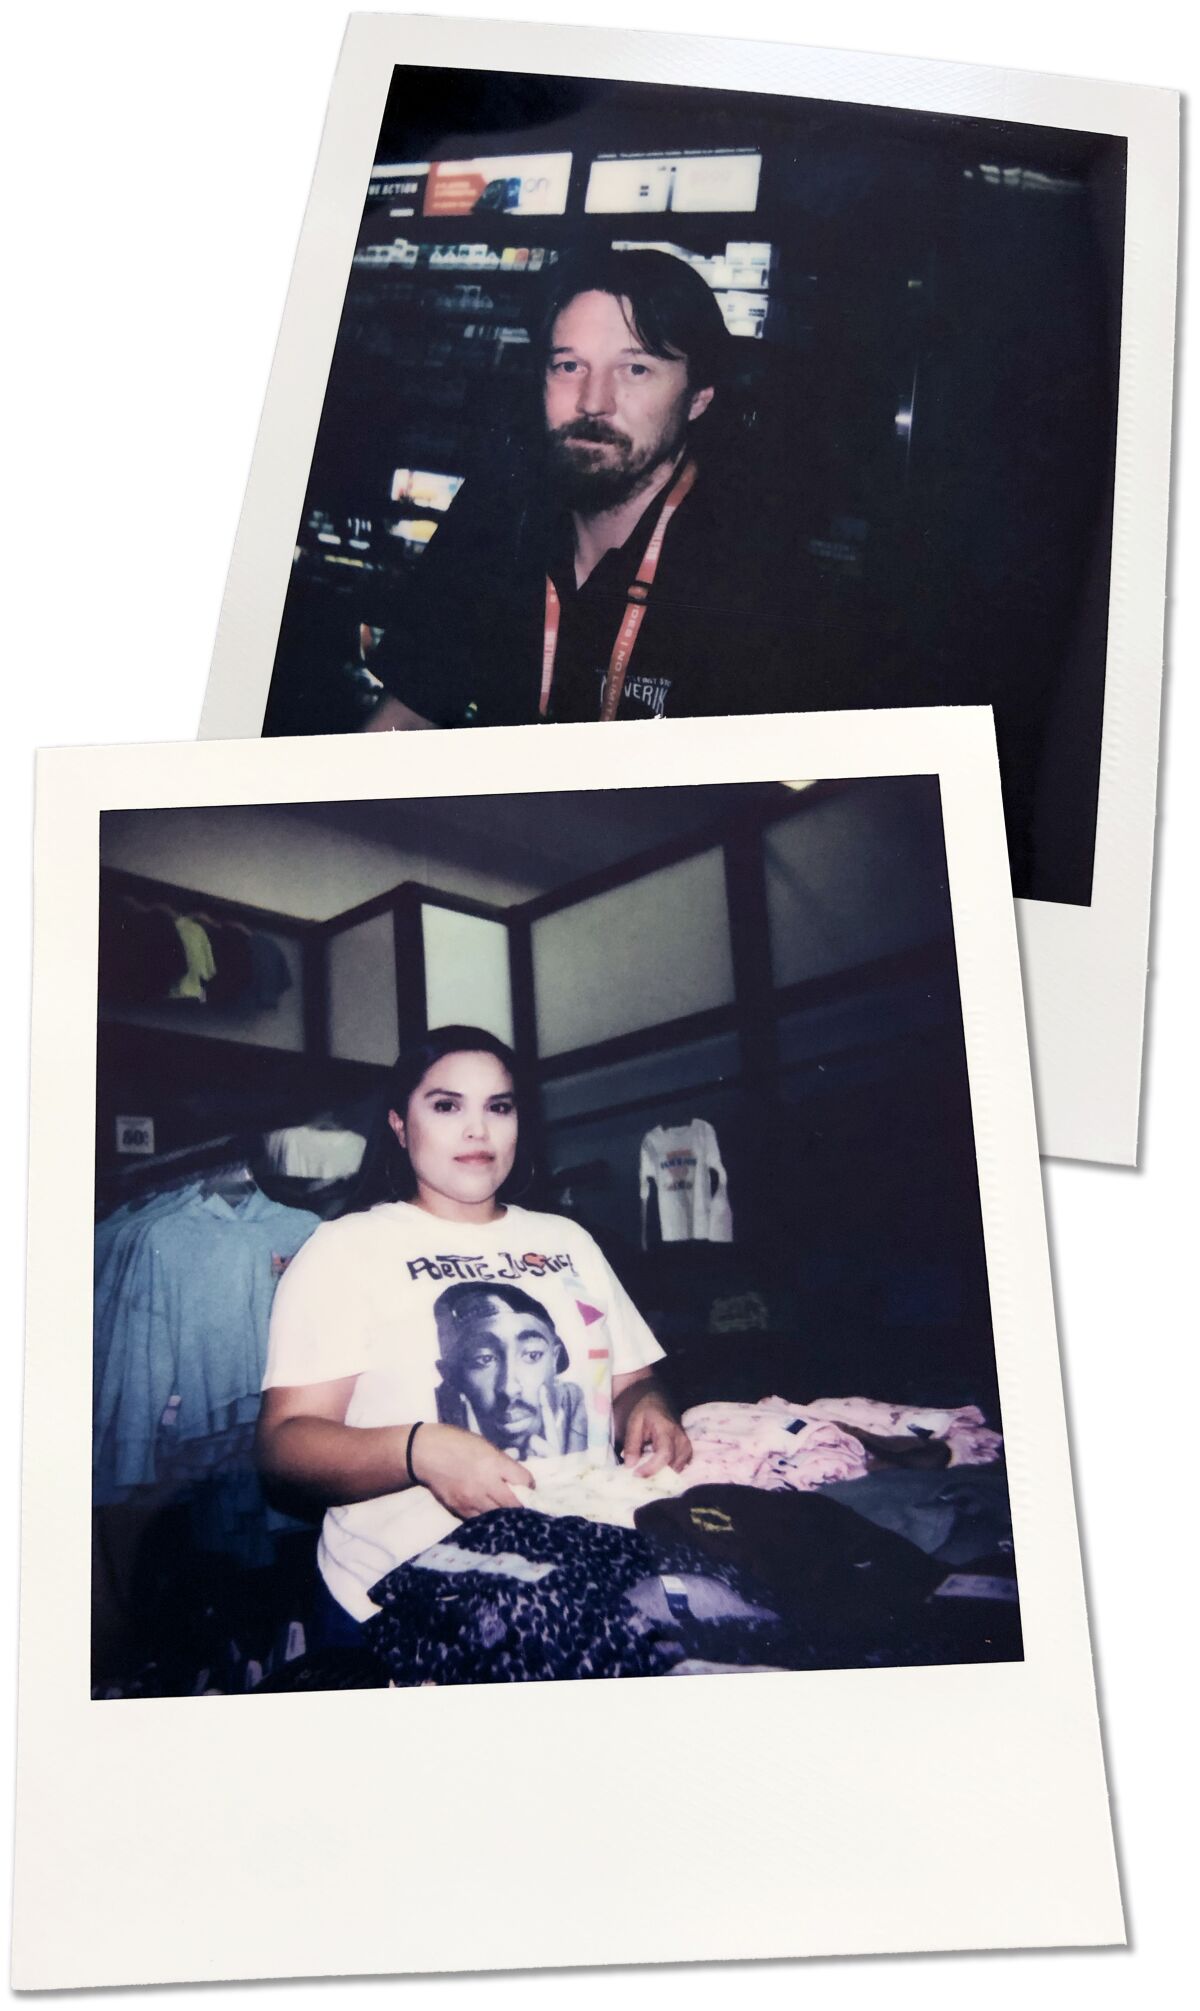 Two Polaroids from Flagstaff, Ariz., of a man and a woman, taken by Connor Sheets.